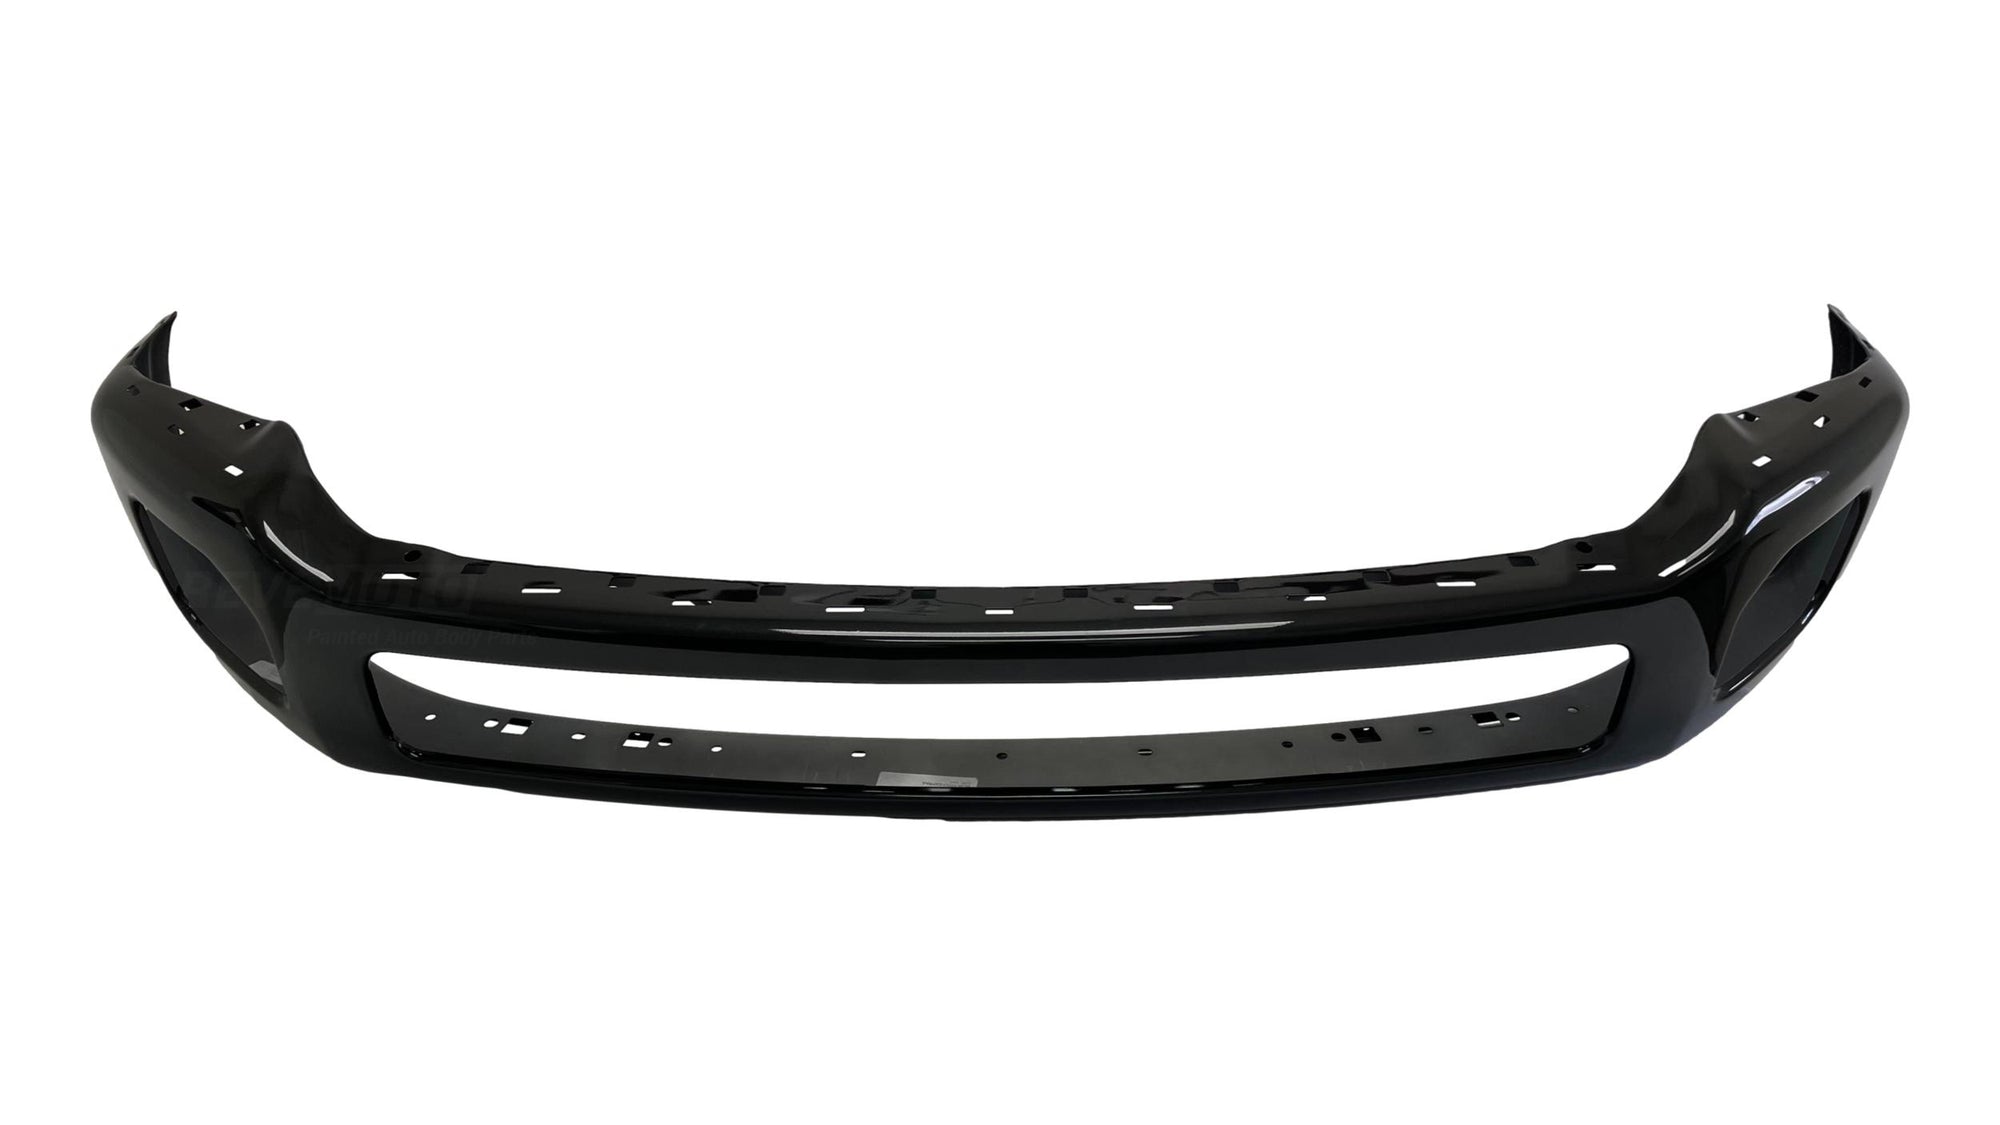 24841 - 2011-2016 Ford F550 Front Bumper Painted (Face Bar) Tuxedo Black Metallic (UH) BC3Z17757CPTM FO1002417